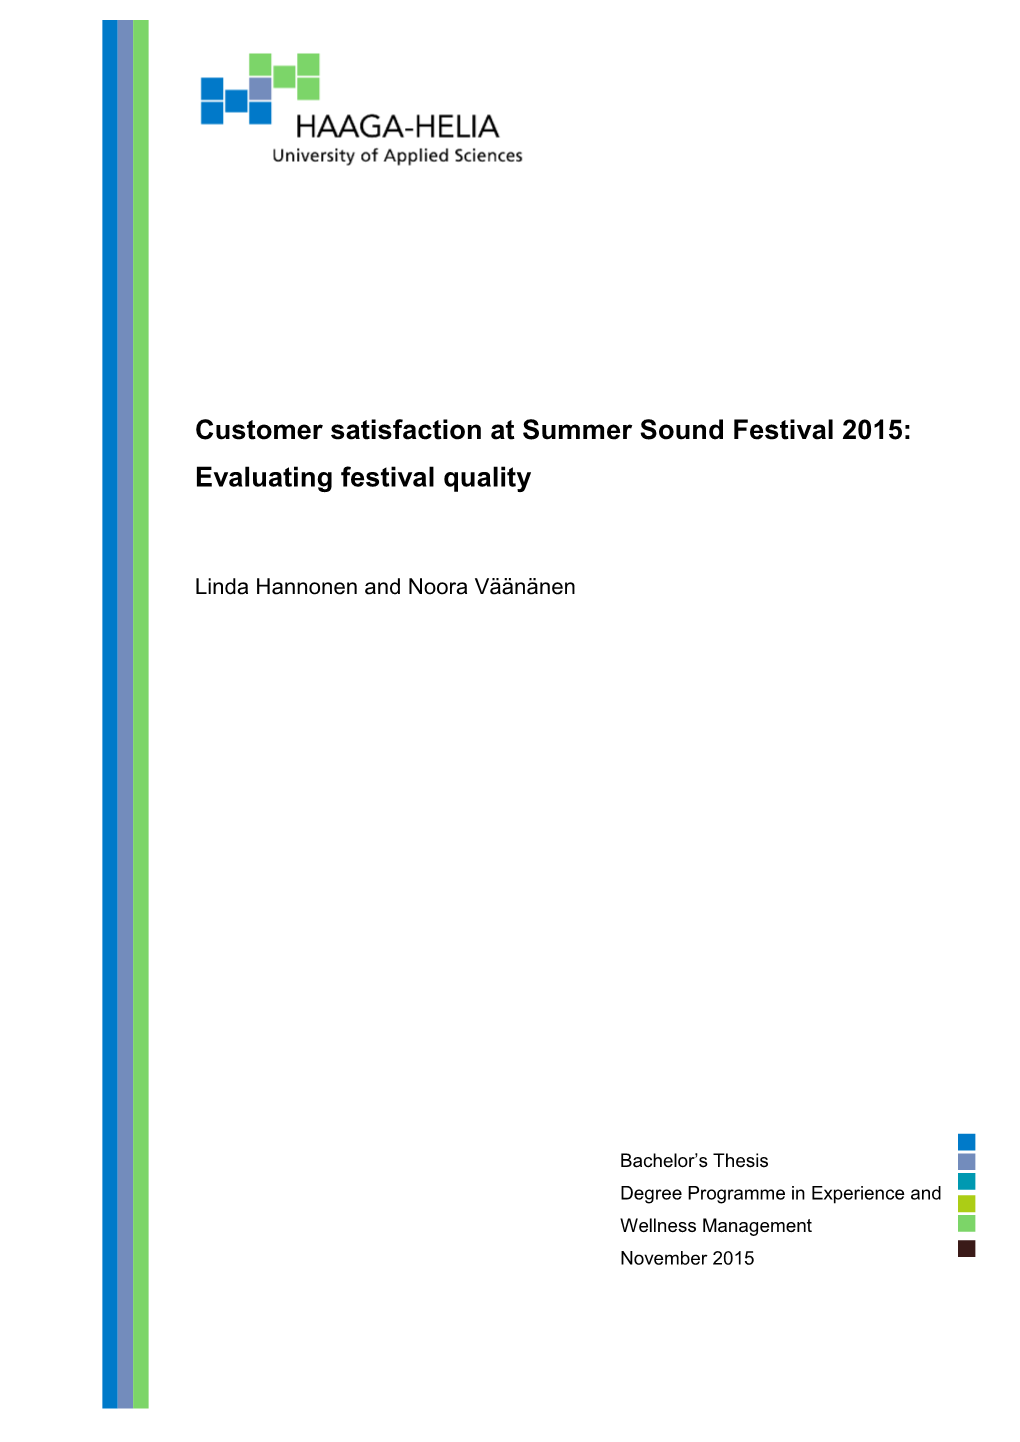 Customer Satisfaction at Summer Sound Festival 2015: Evaluating Festival Quality